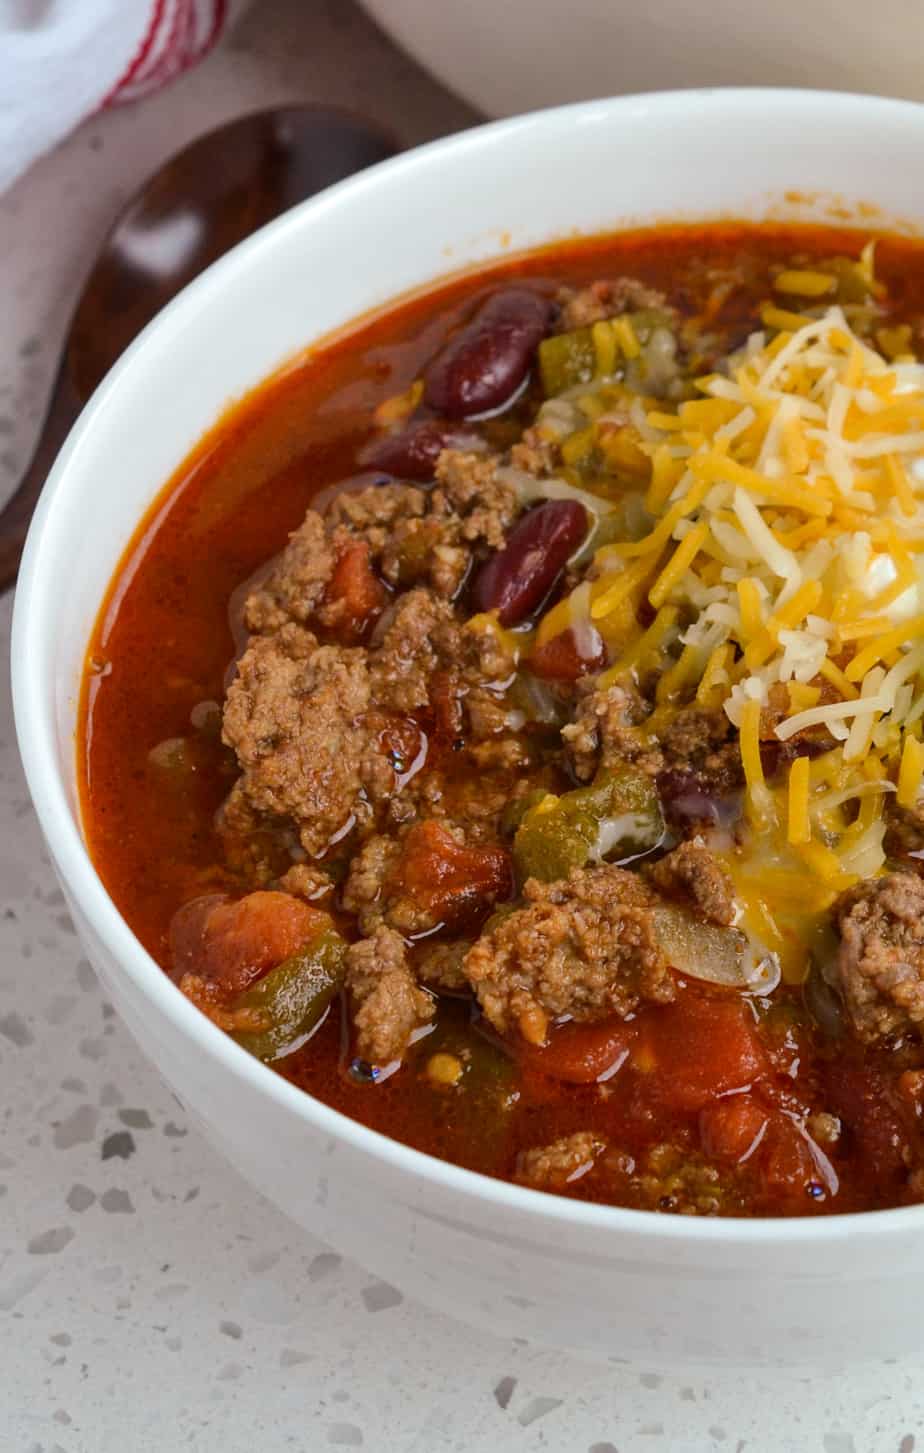 Best Chili Recipe Thick And Hearty With A Little Heat